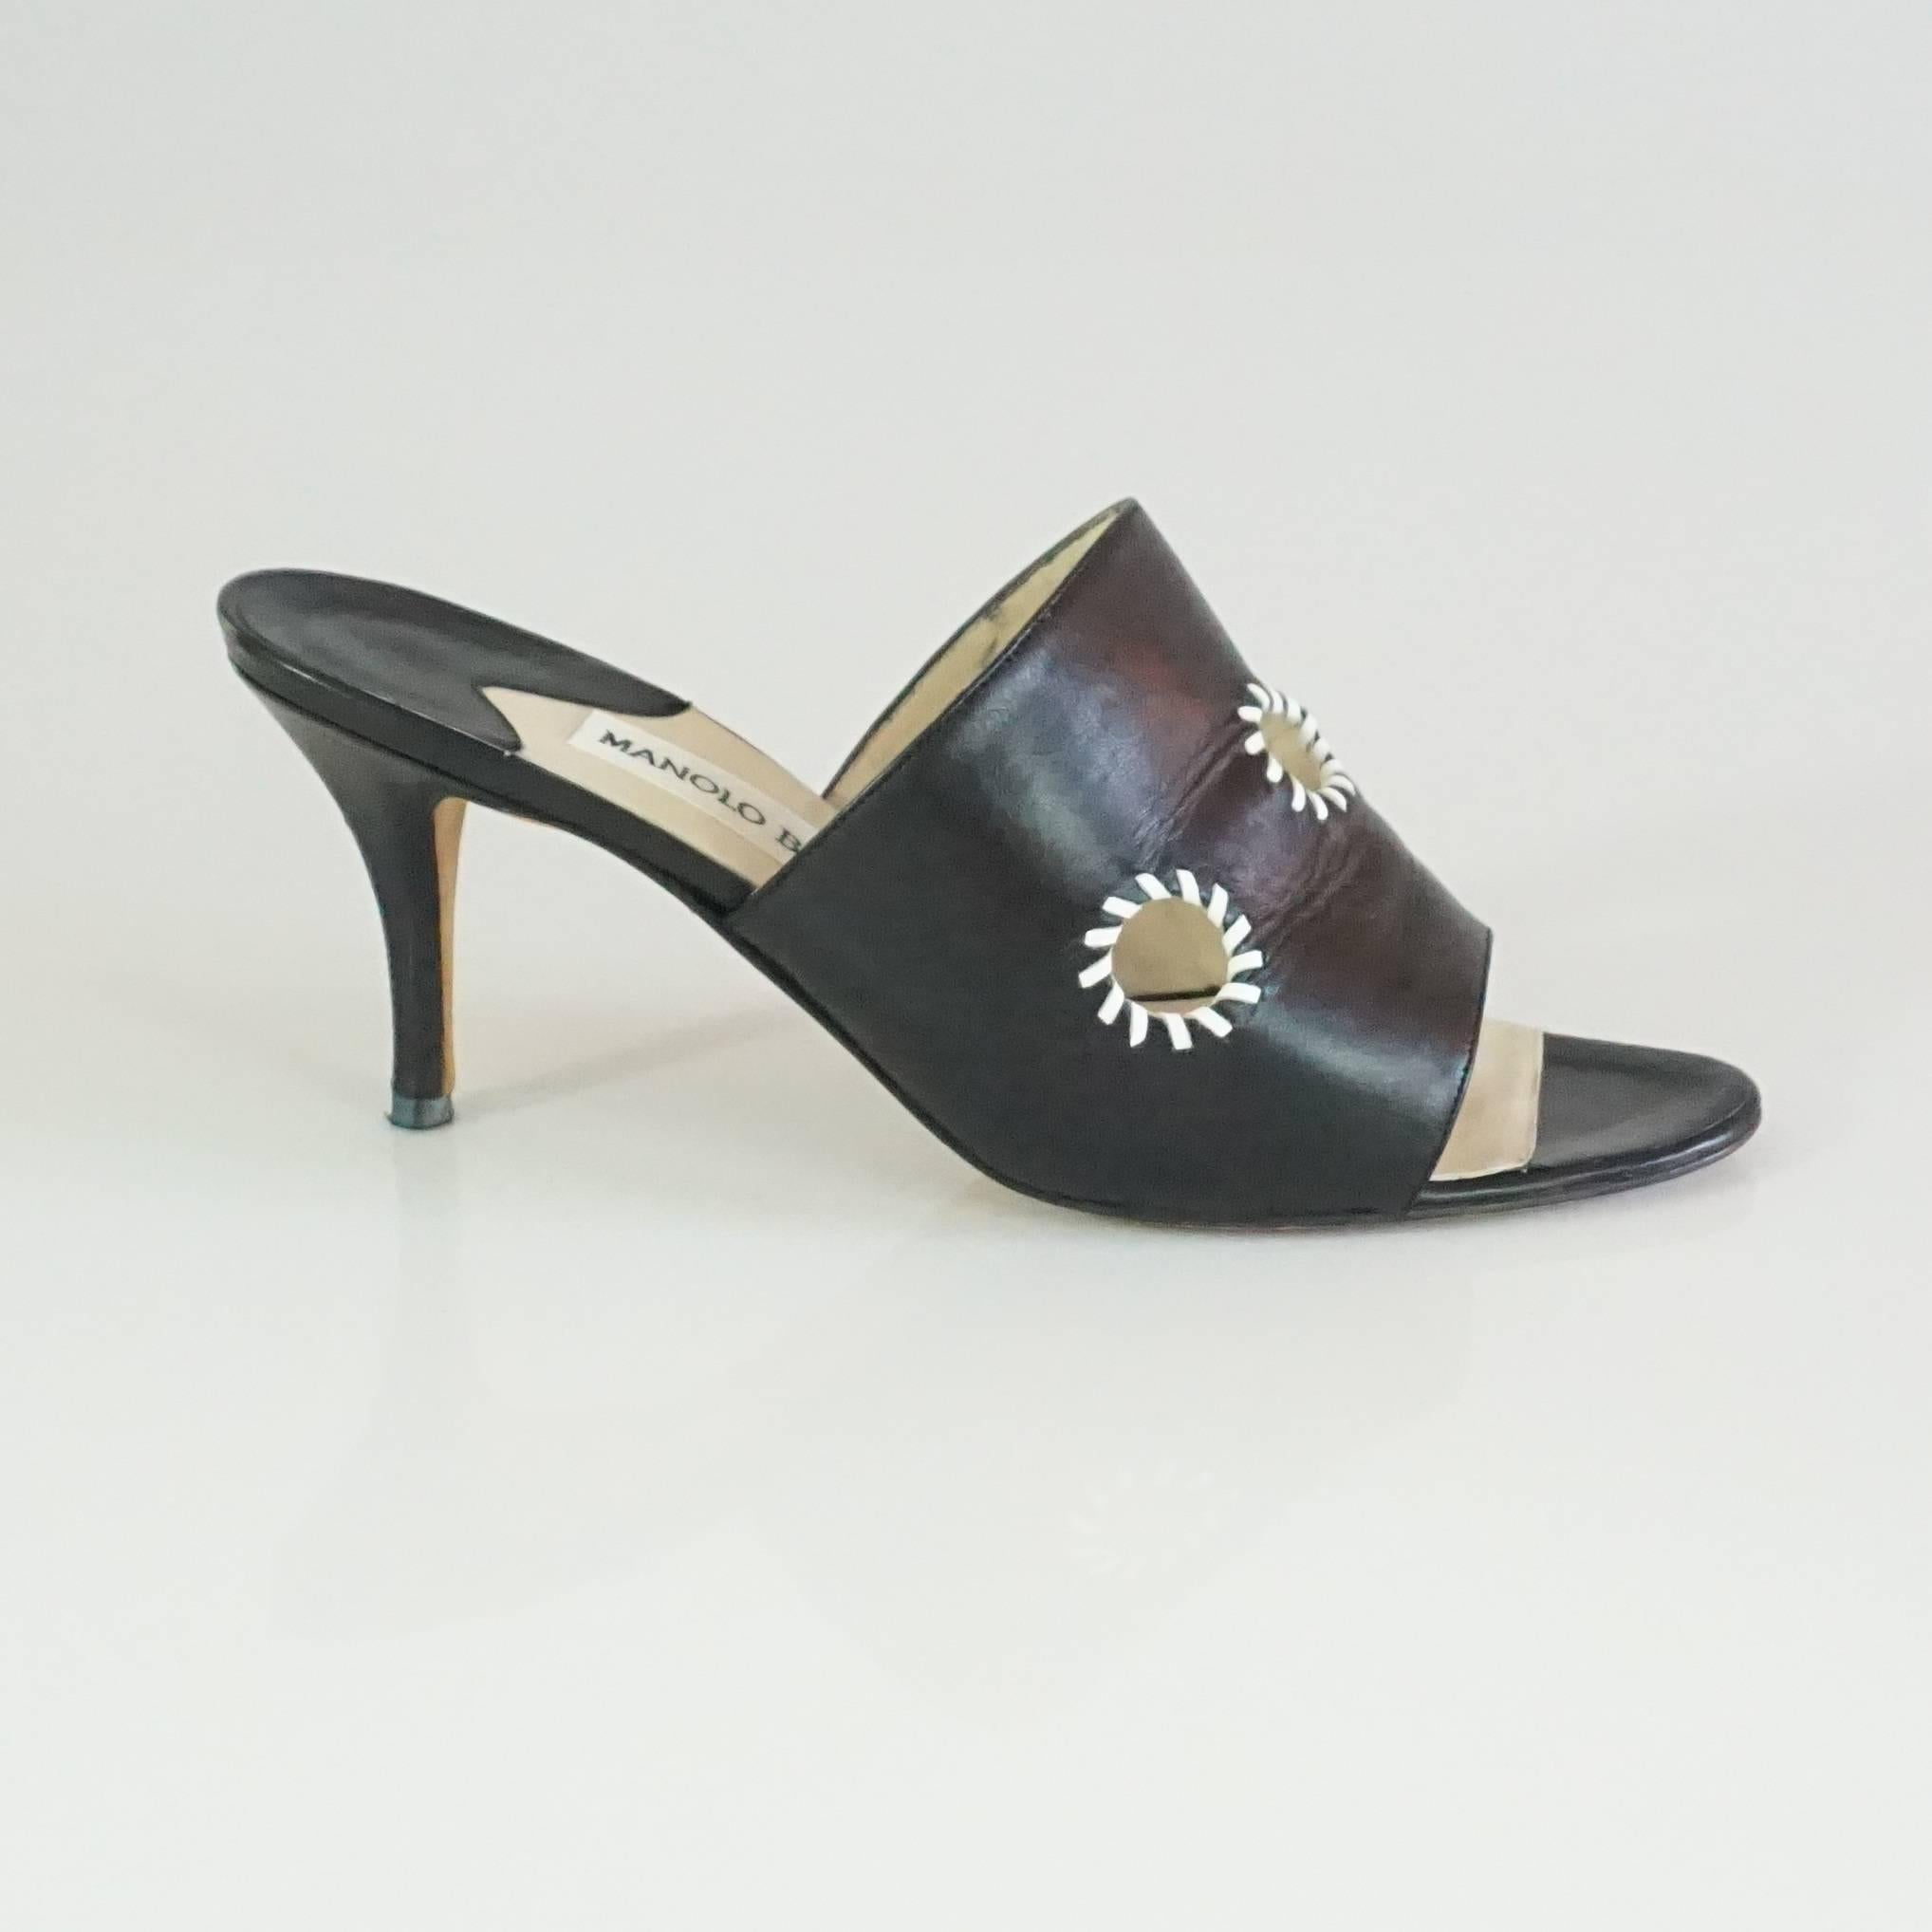 Manolo Blahnik Black Leather Mules with White Stitched Cutouts - 37. These shoes are a trendy everyday wear. They feature 3 cutouts with white stitching around them. They are in excellent condition with some bottom wear and very minor slight marks